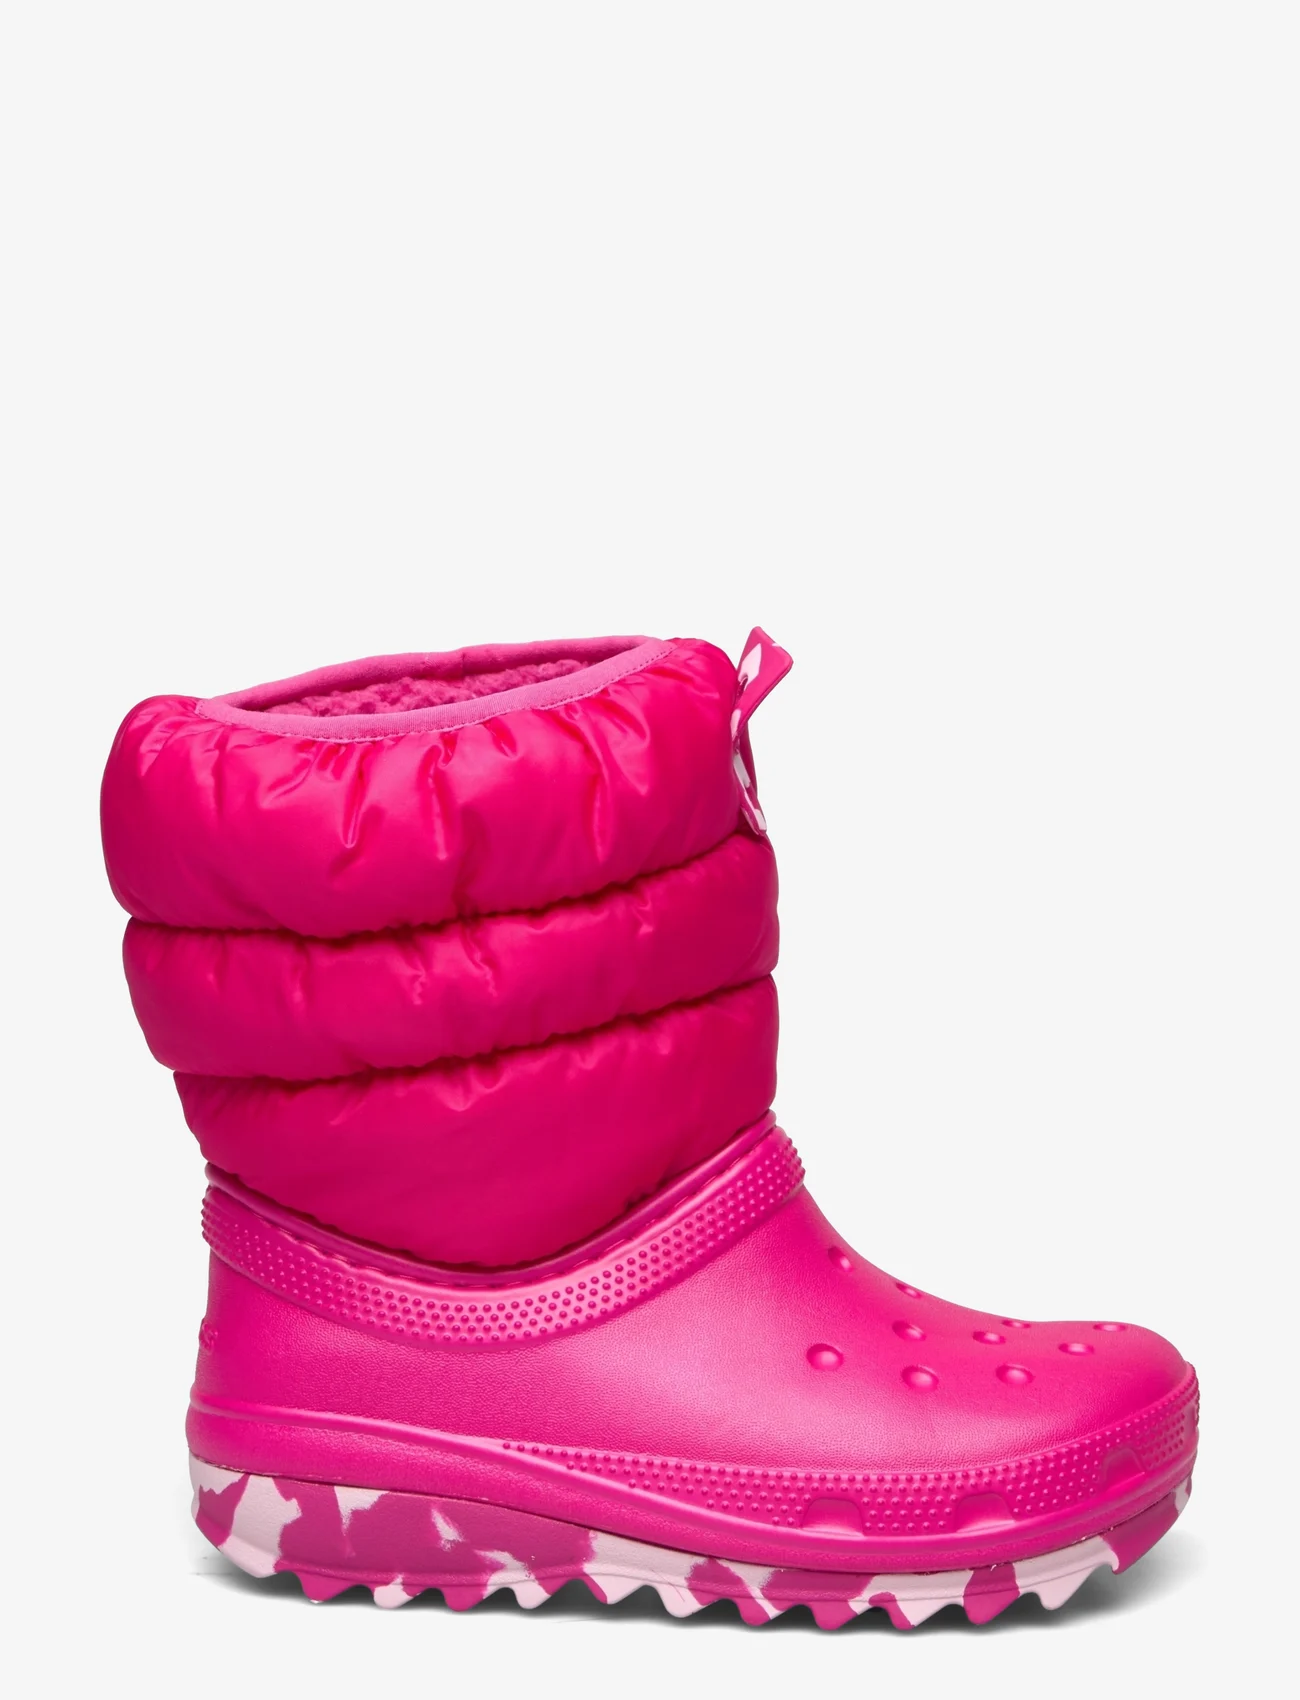 Crocs - Classic Neo Puff Boot K - kinder - candy pink - 1